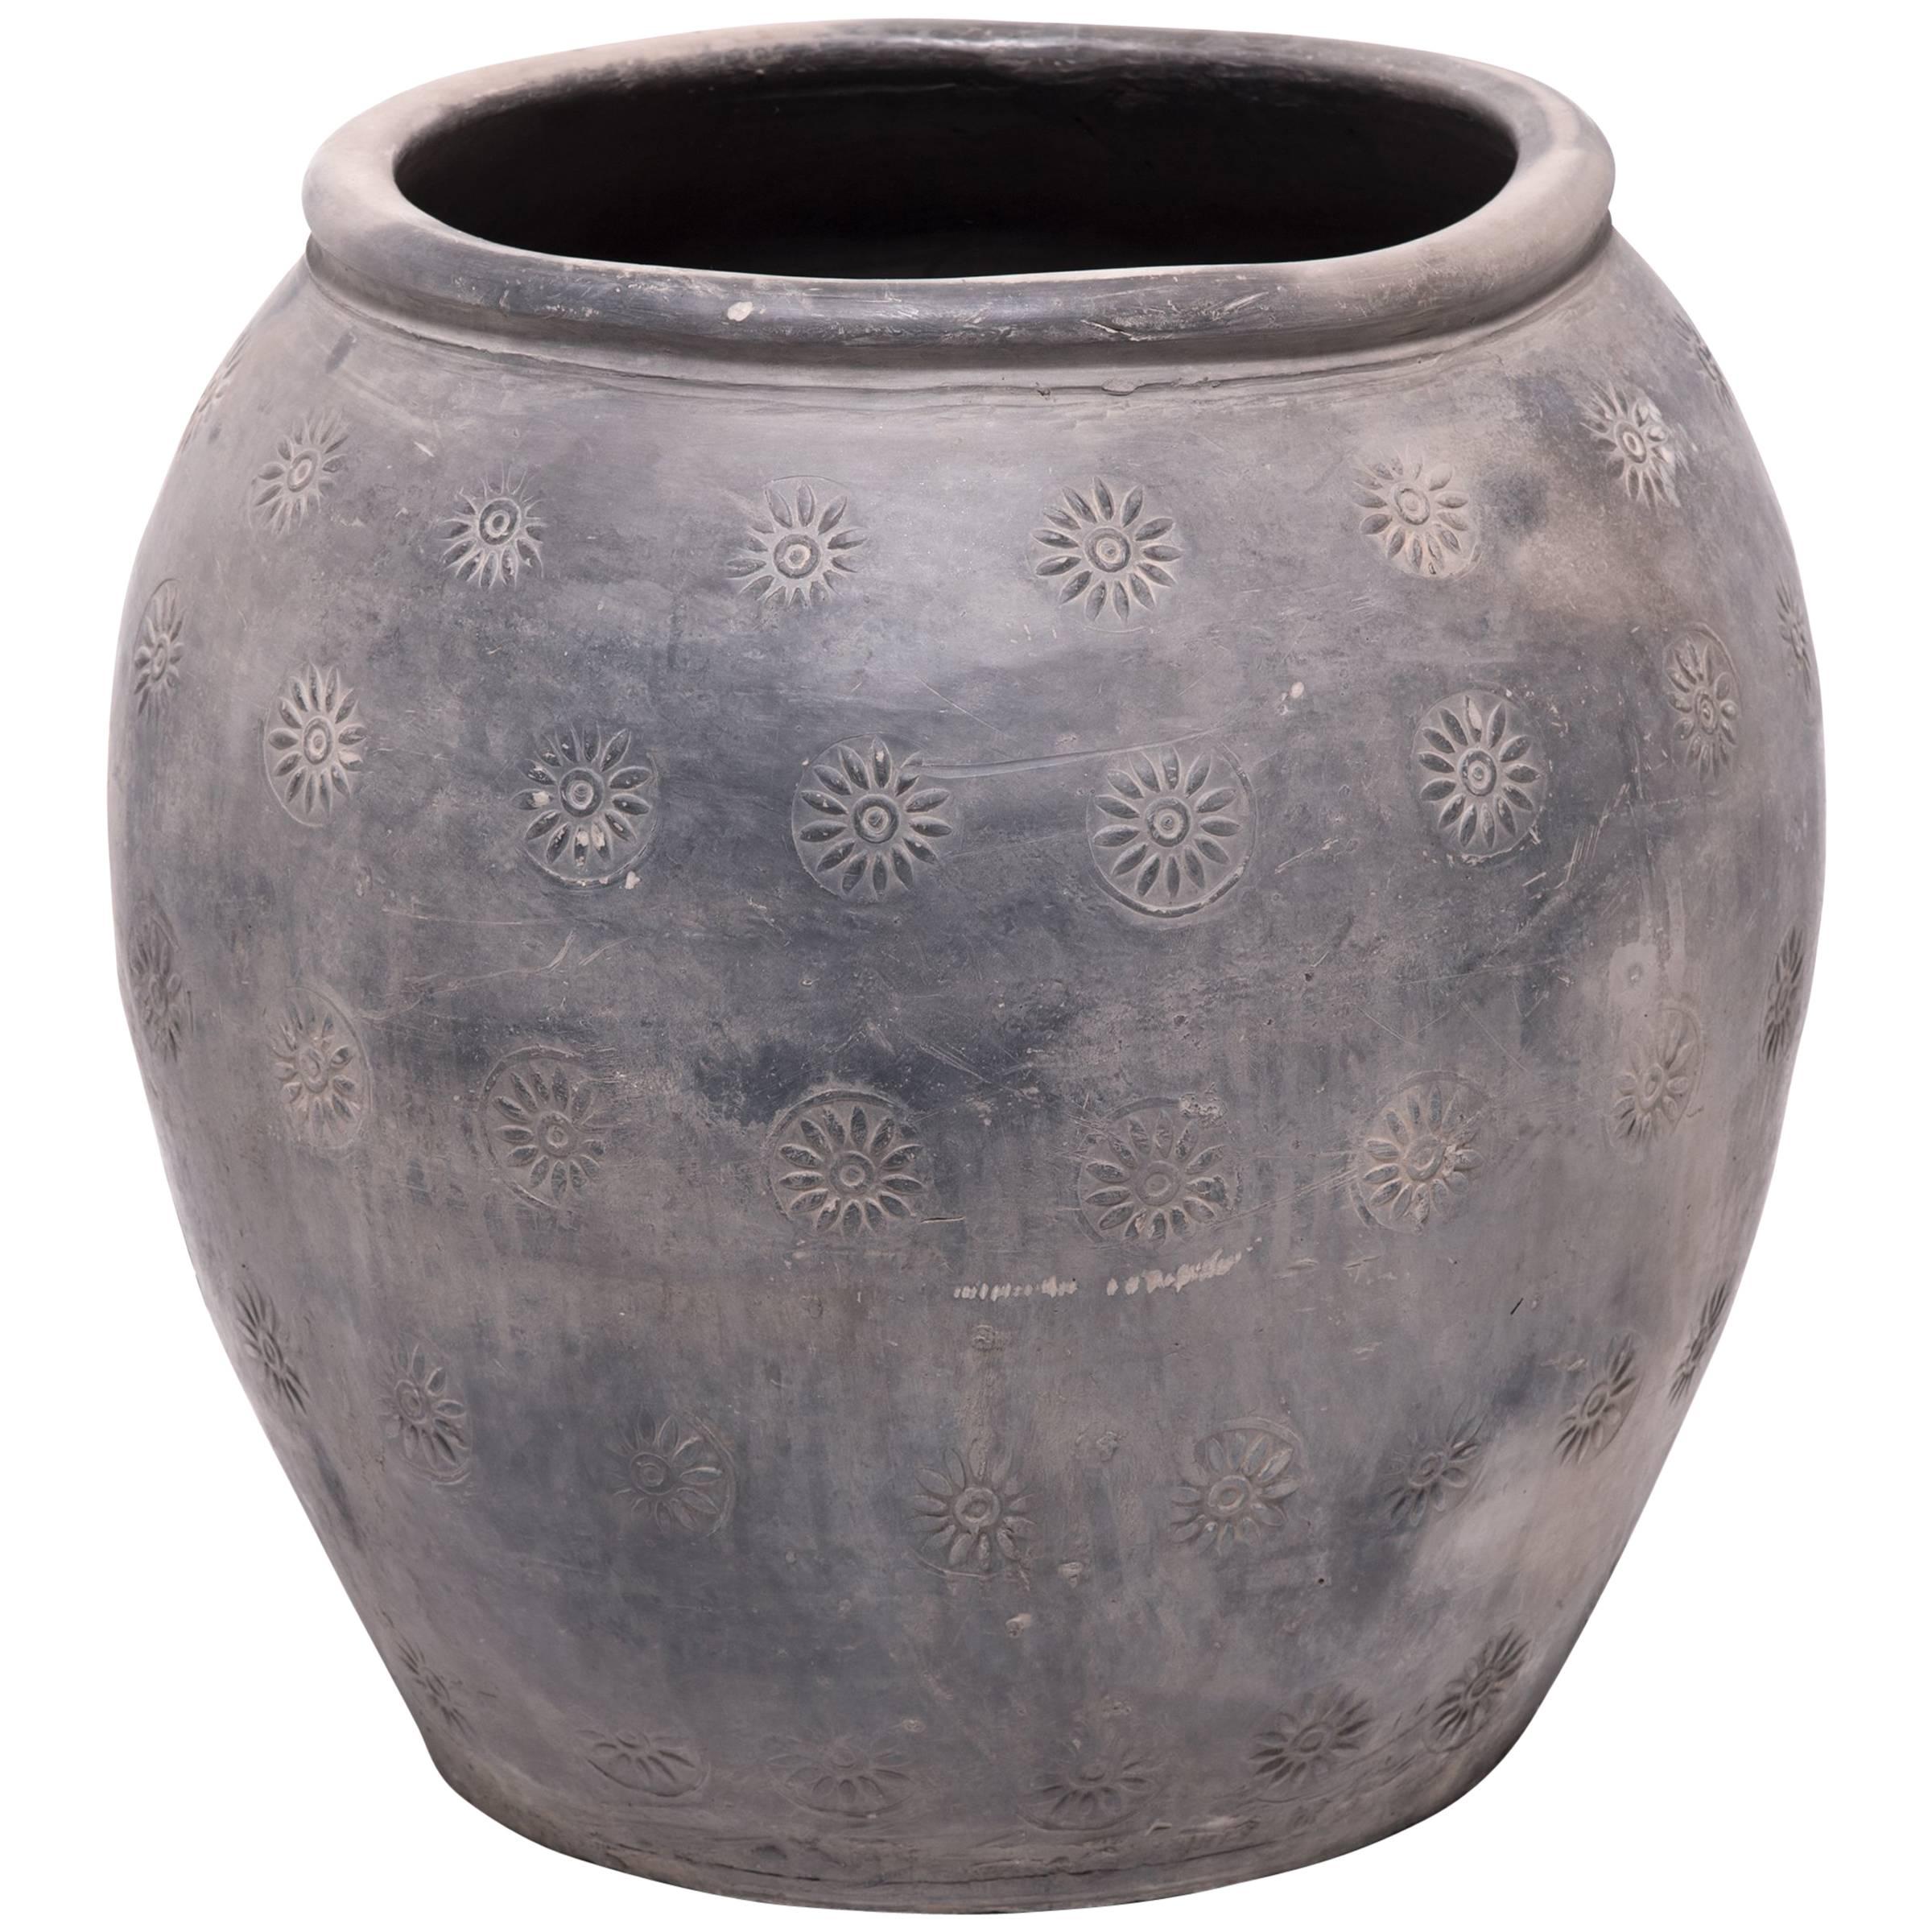 Early 20th Century Chinese Unglazed Stamped Clay Jar